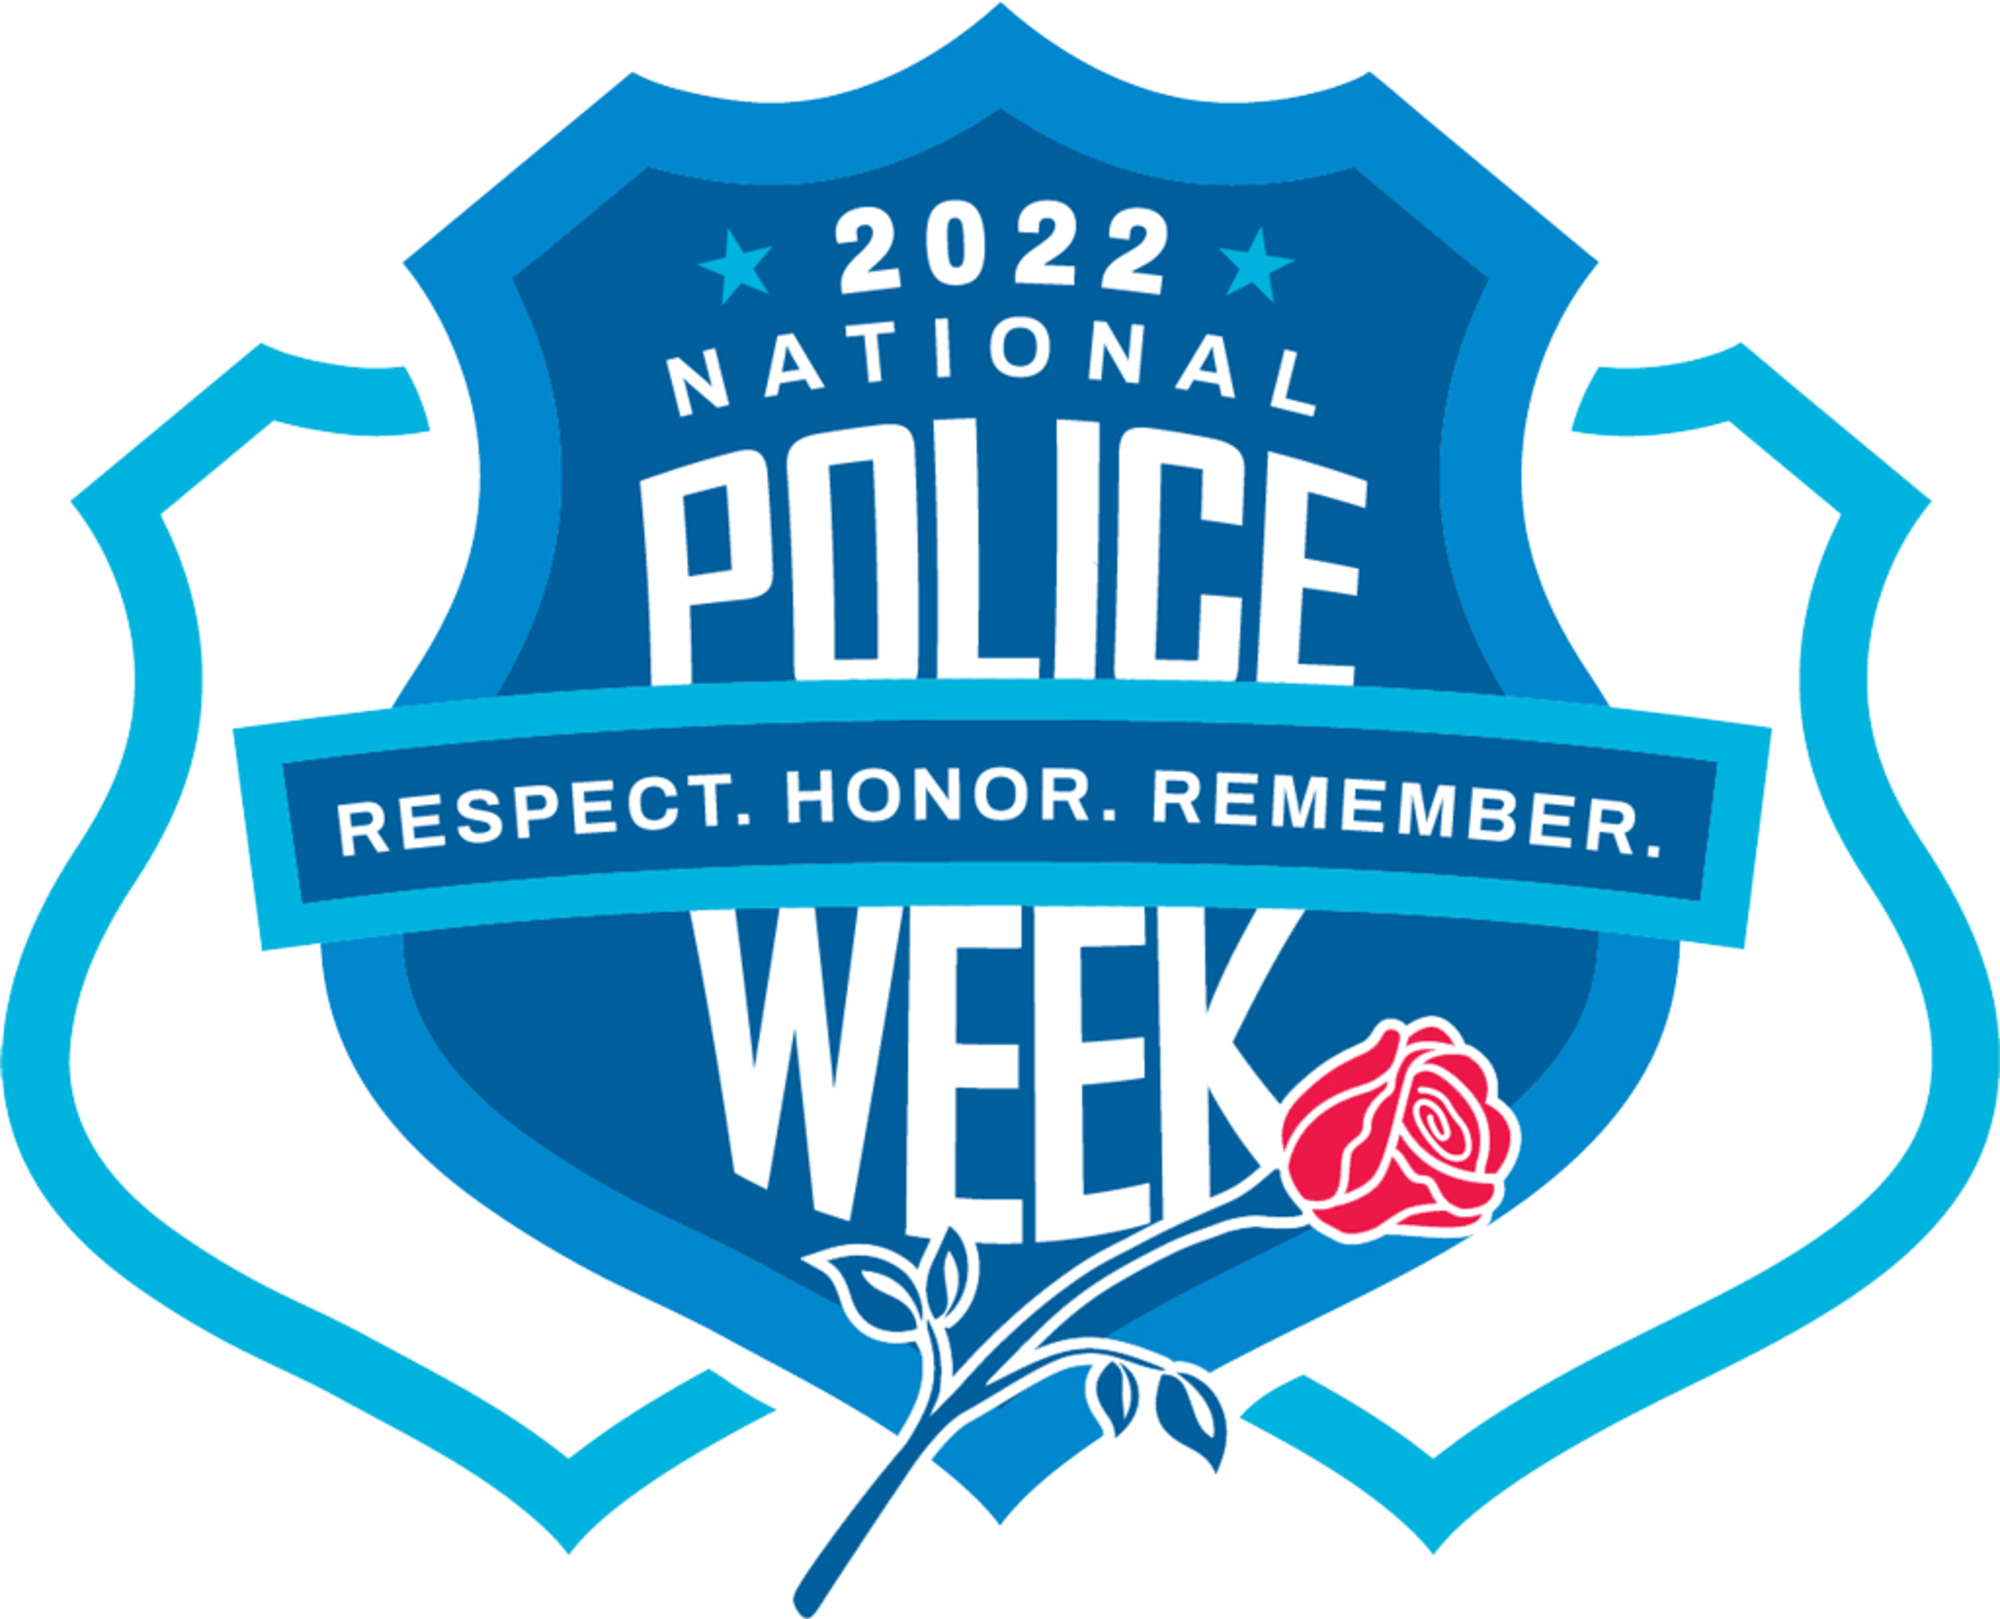 2022 National Police Week - May 16 to 20, 2022